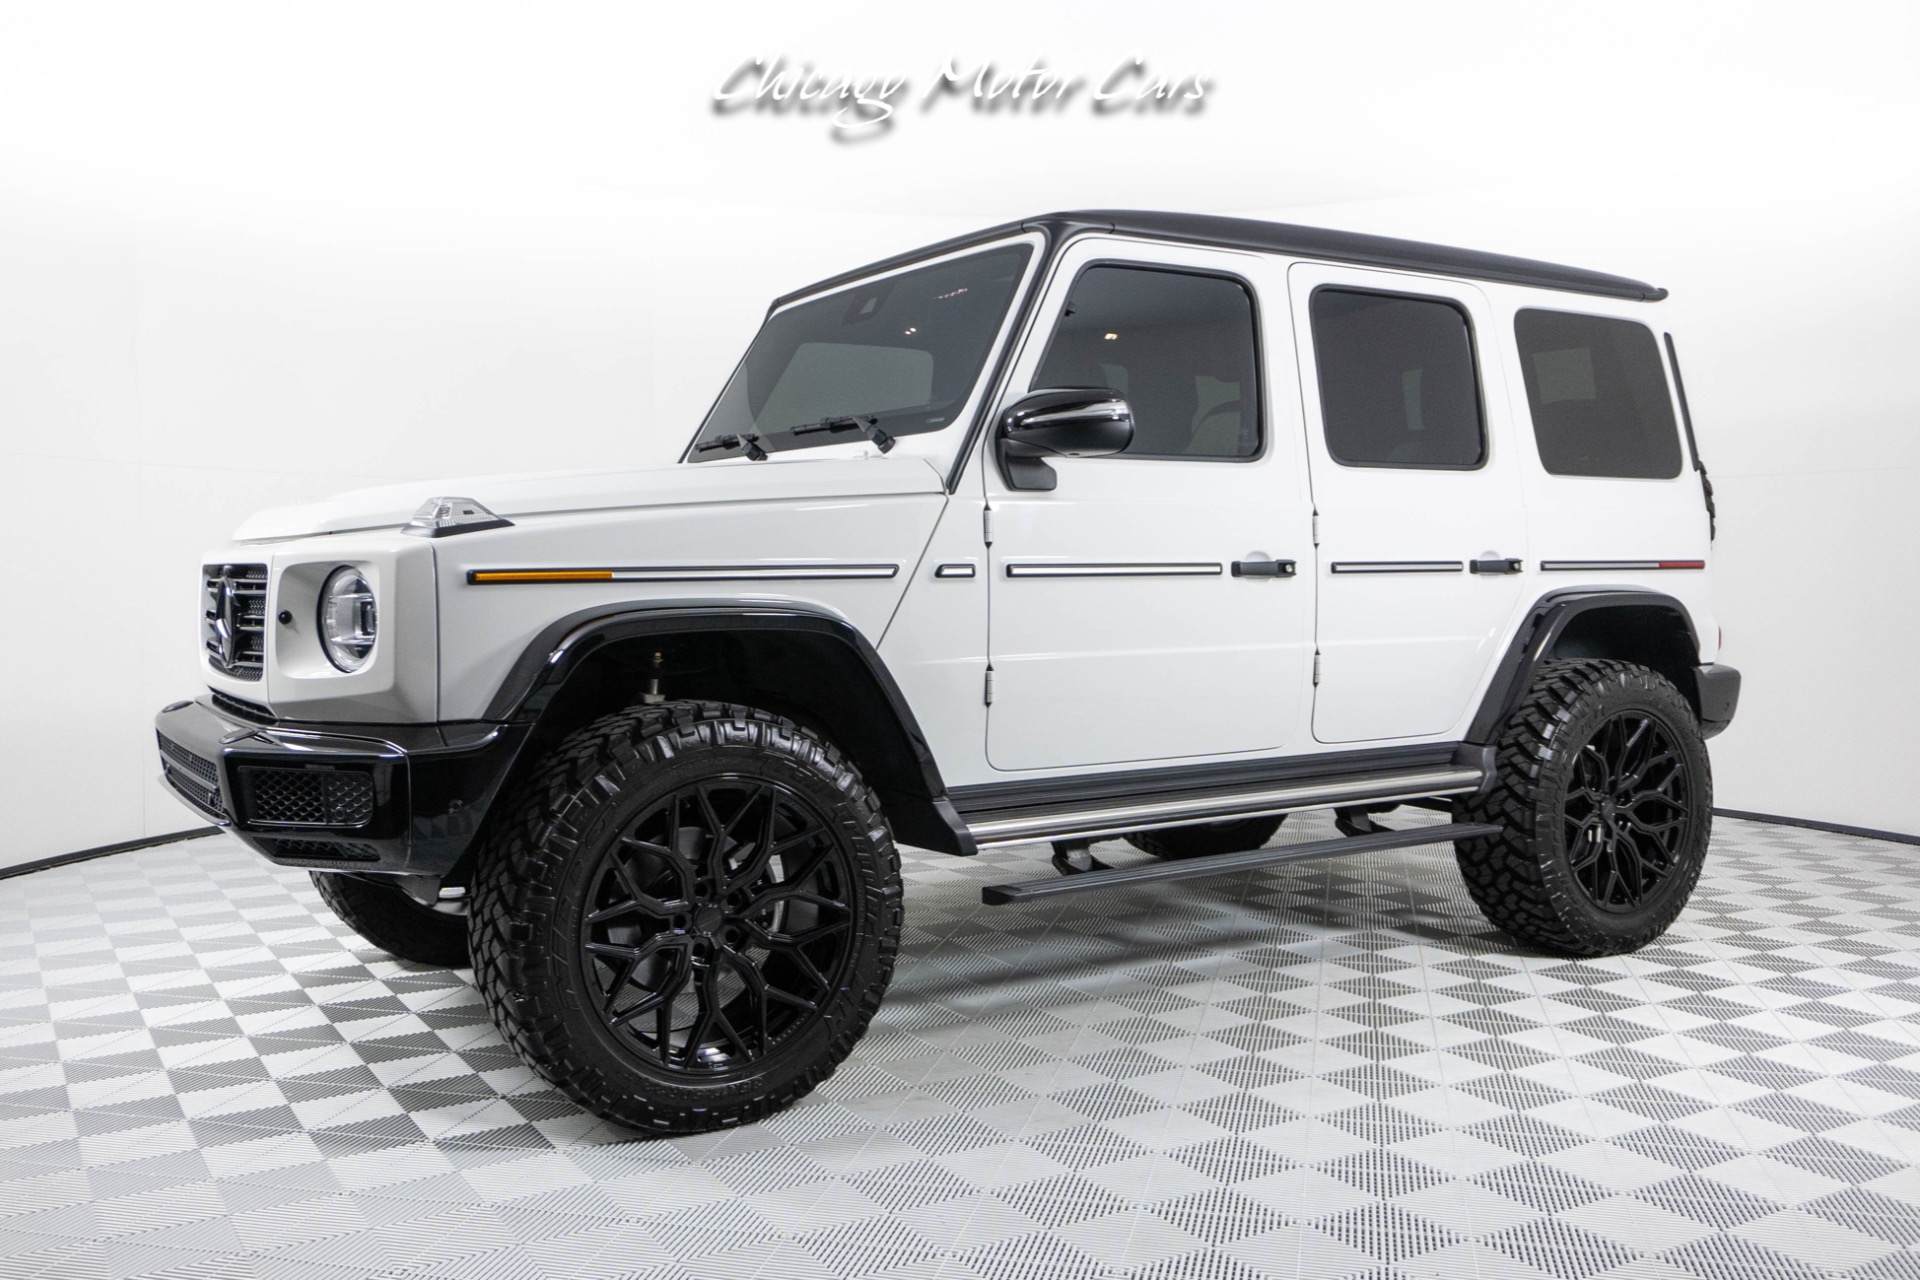 Used-2019-Mercedes-Benz-G550-SUV-Exclusive-Interior-Package-22-in-Vossen-Wheels-Comfort-Seat-Package